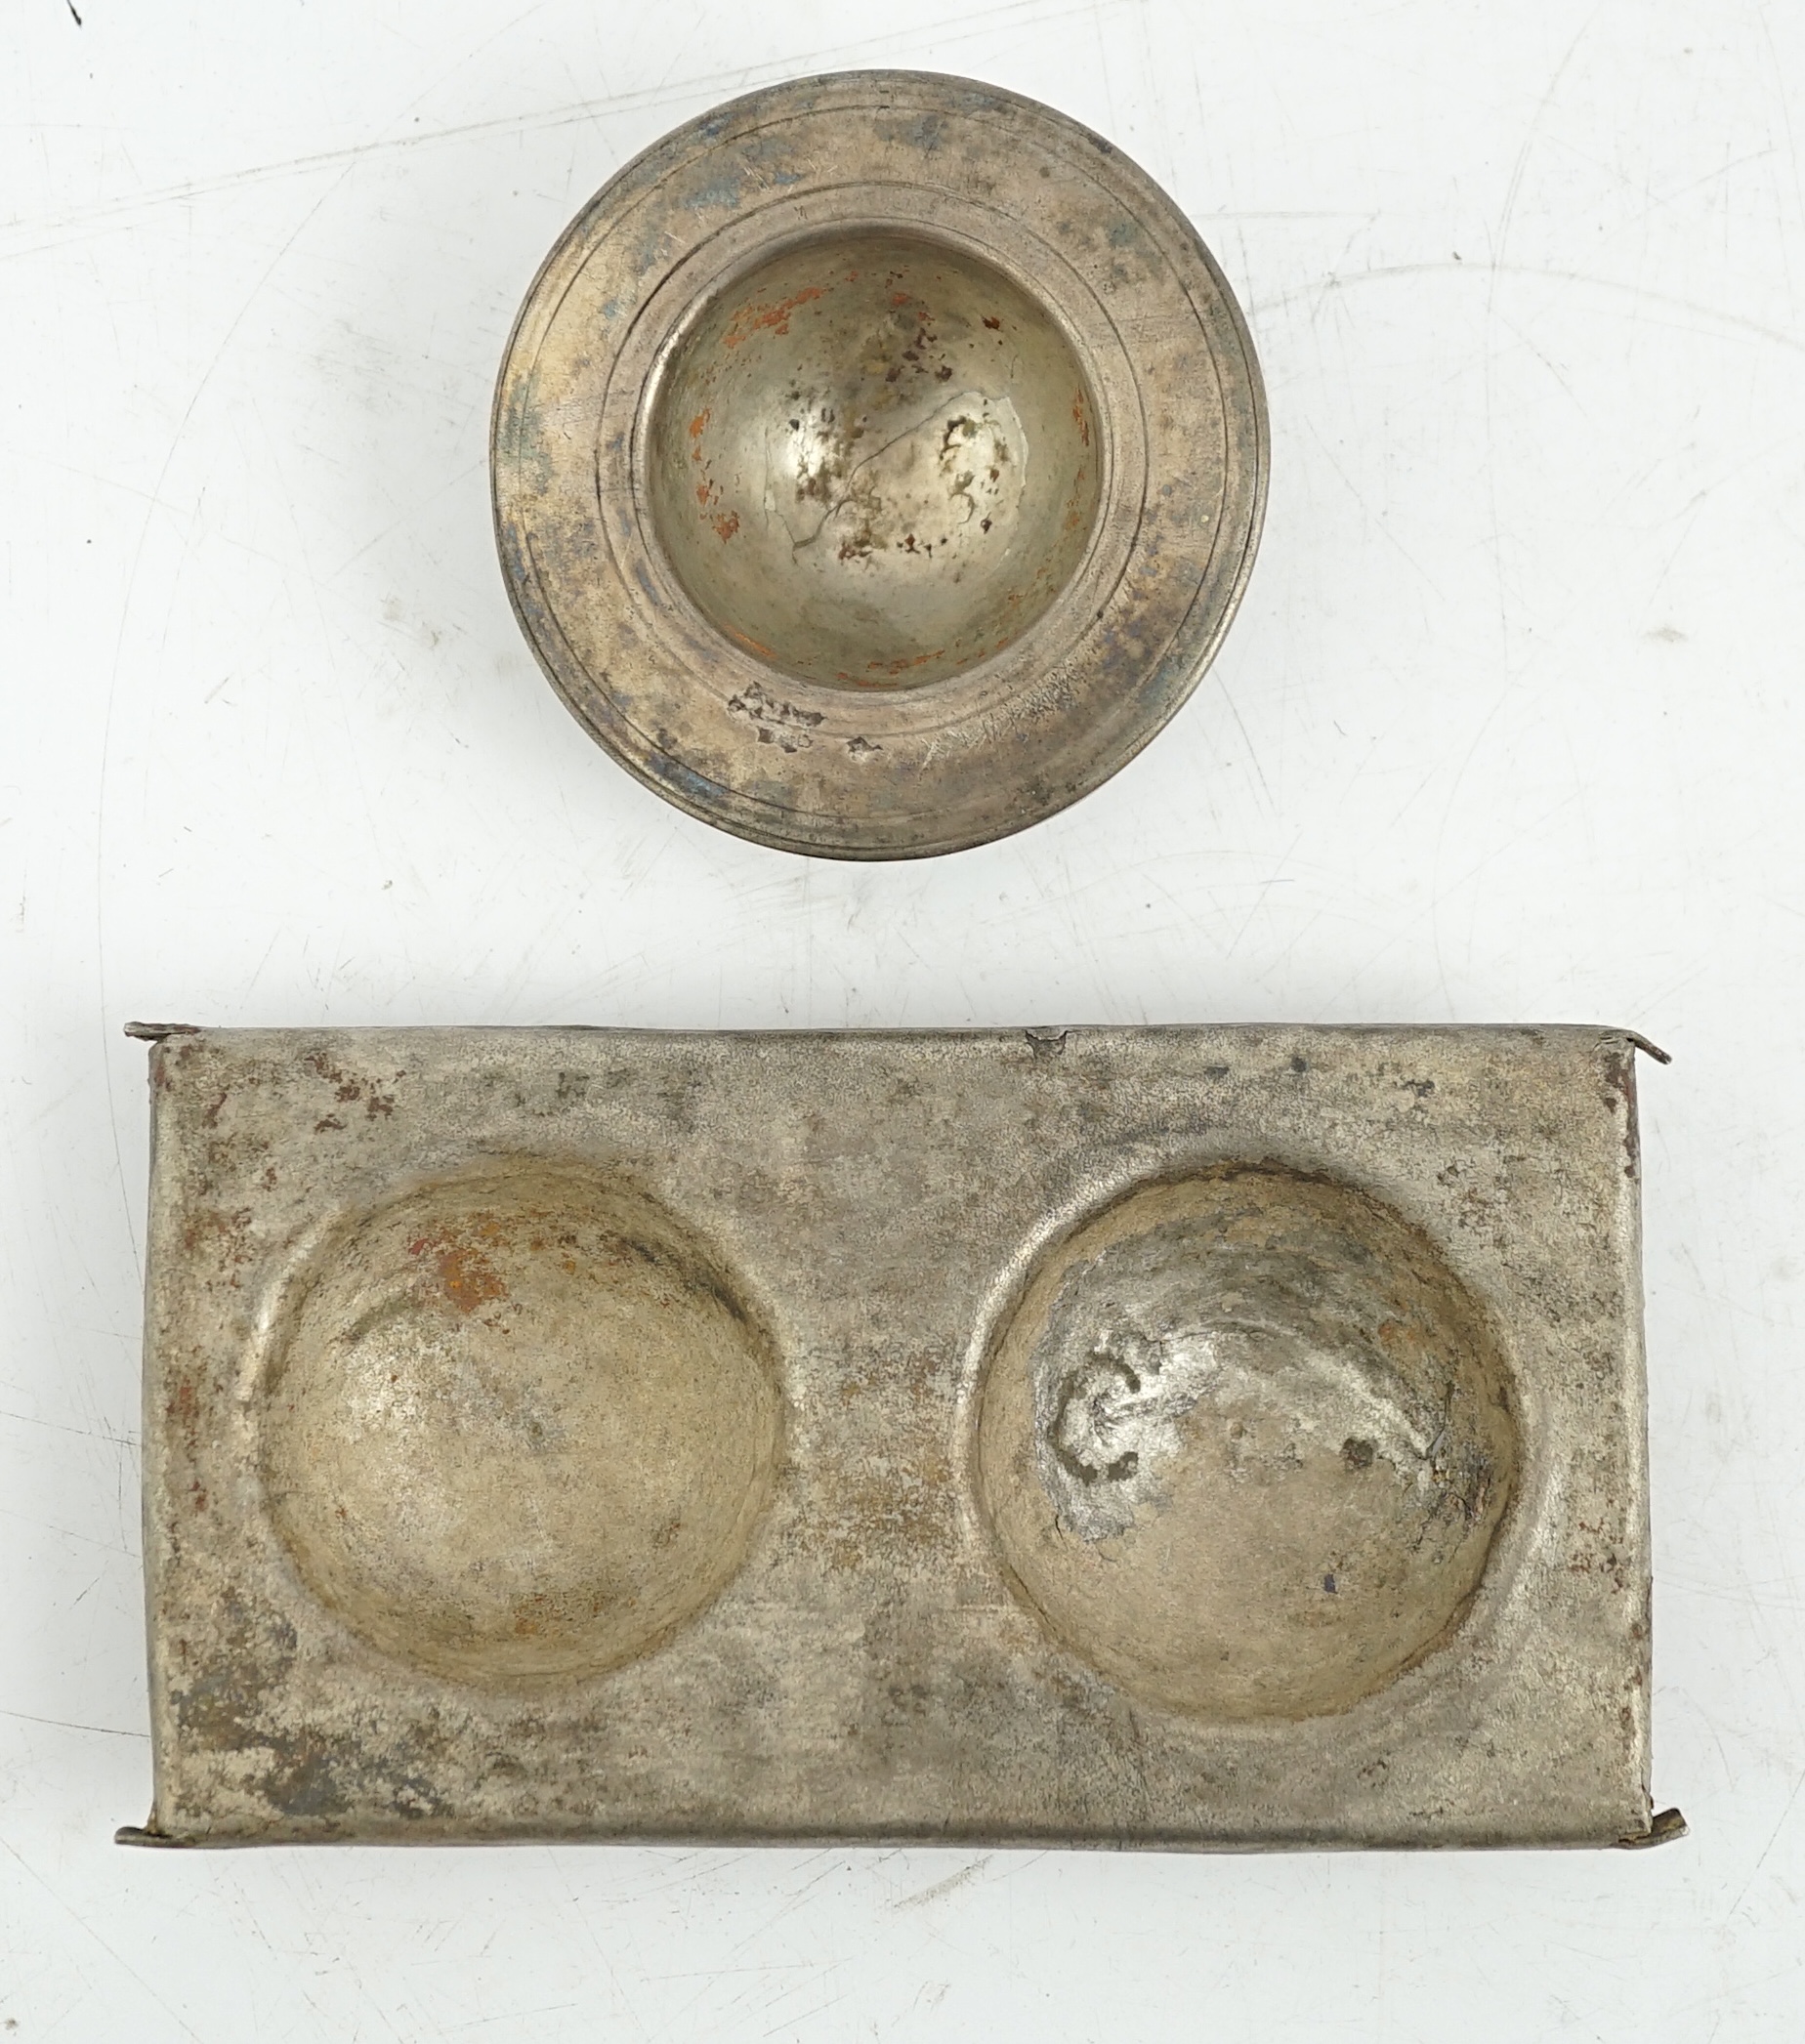 A silver tray and cup, Roman or Gandhara, c. late 1st century BC - early 1st century A.D.